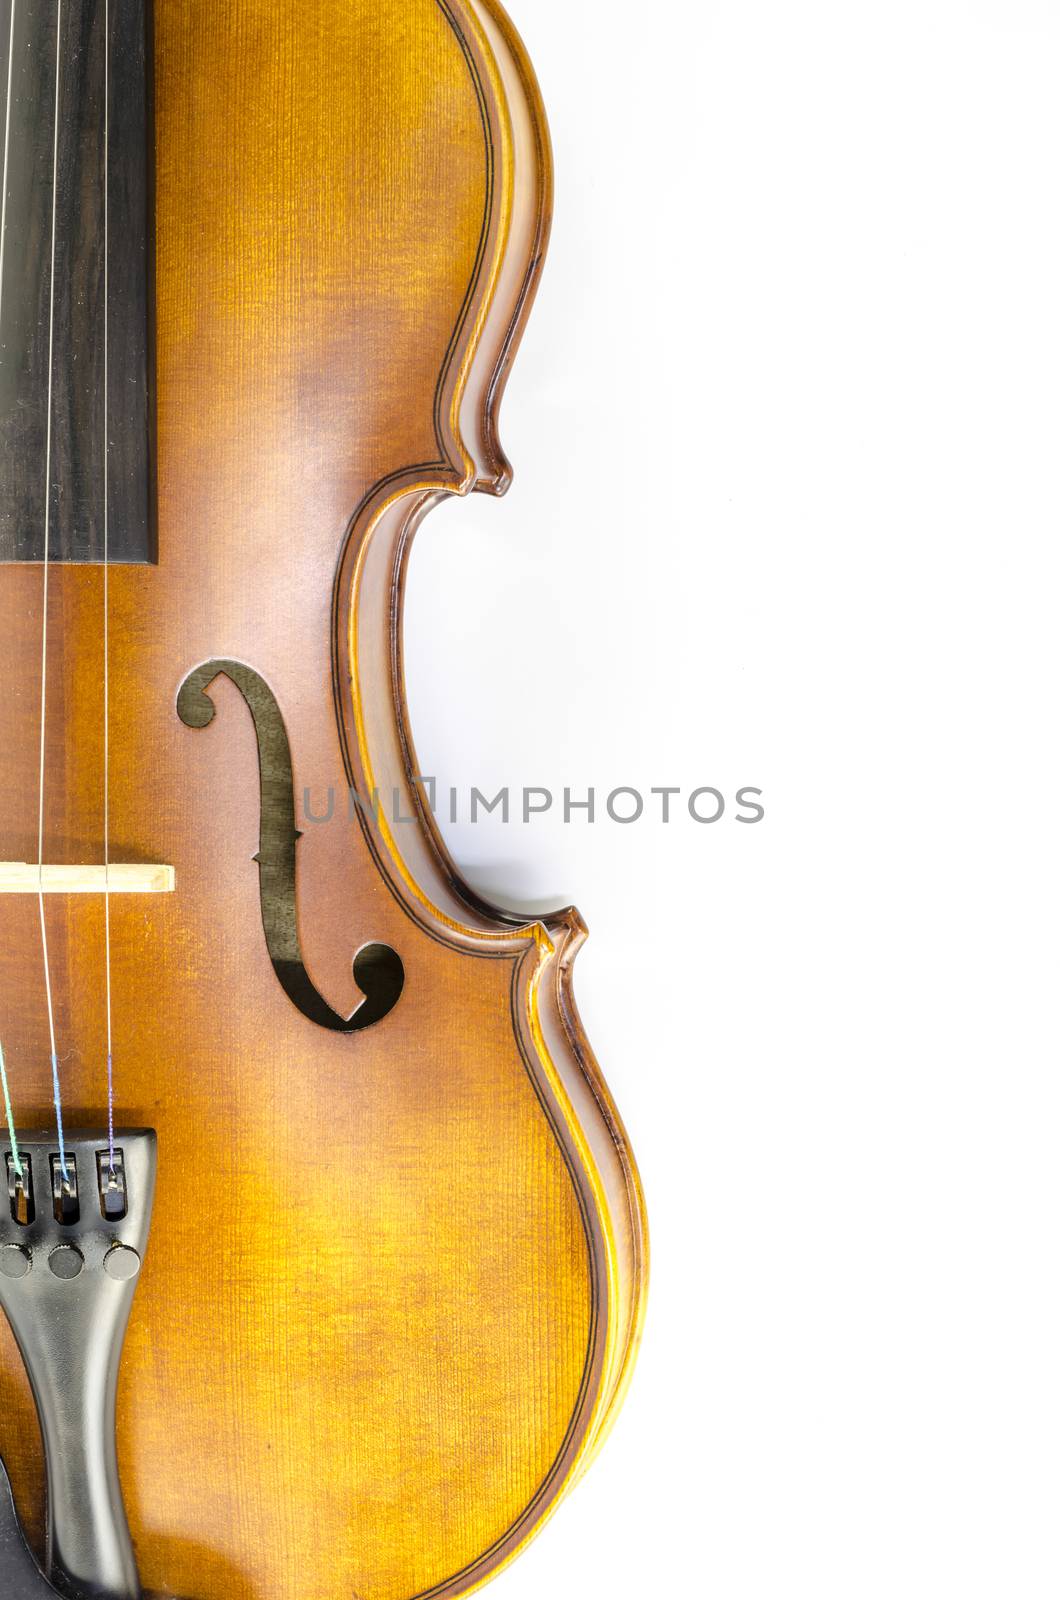 music string instrument violin isolated on white background